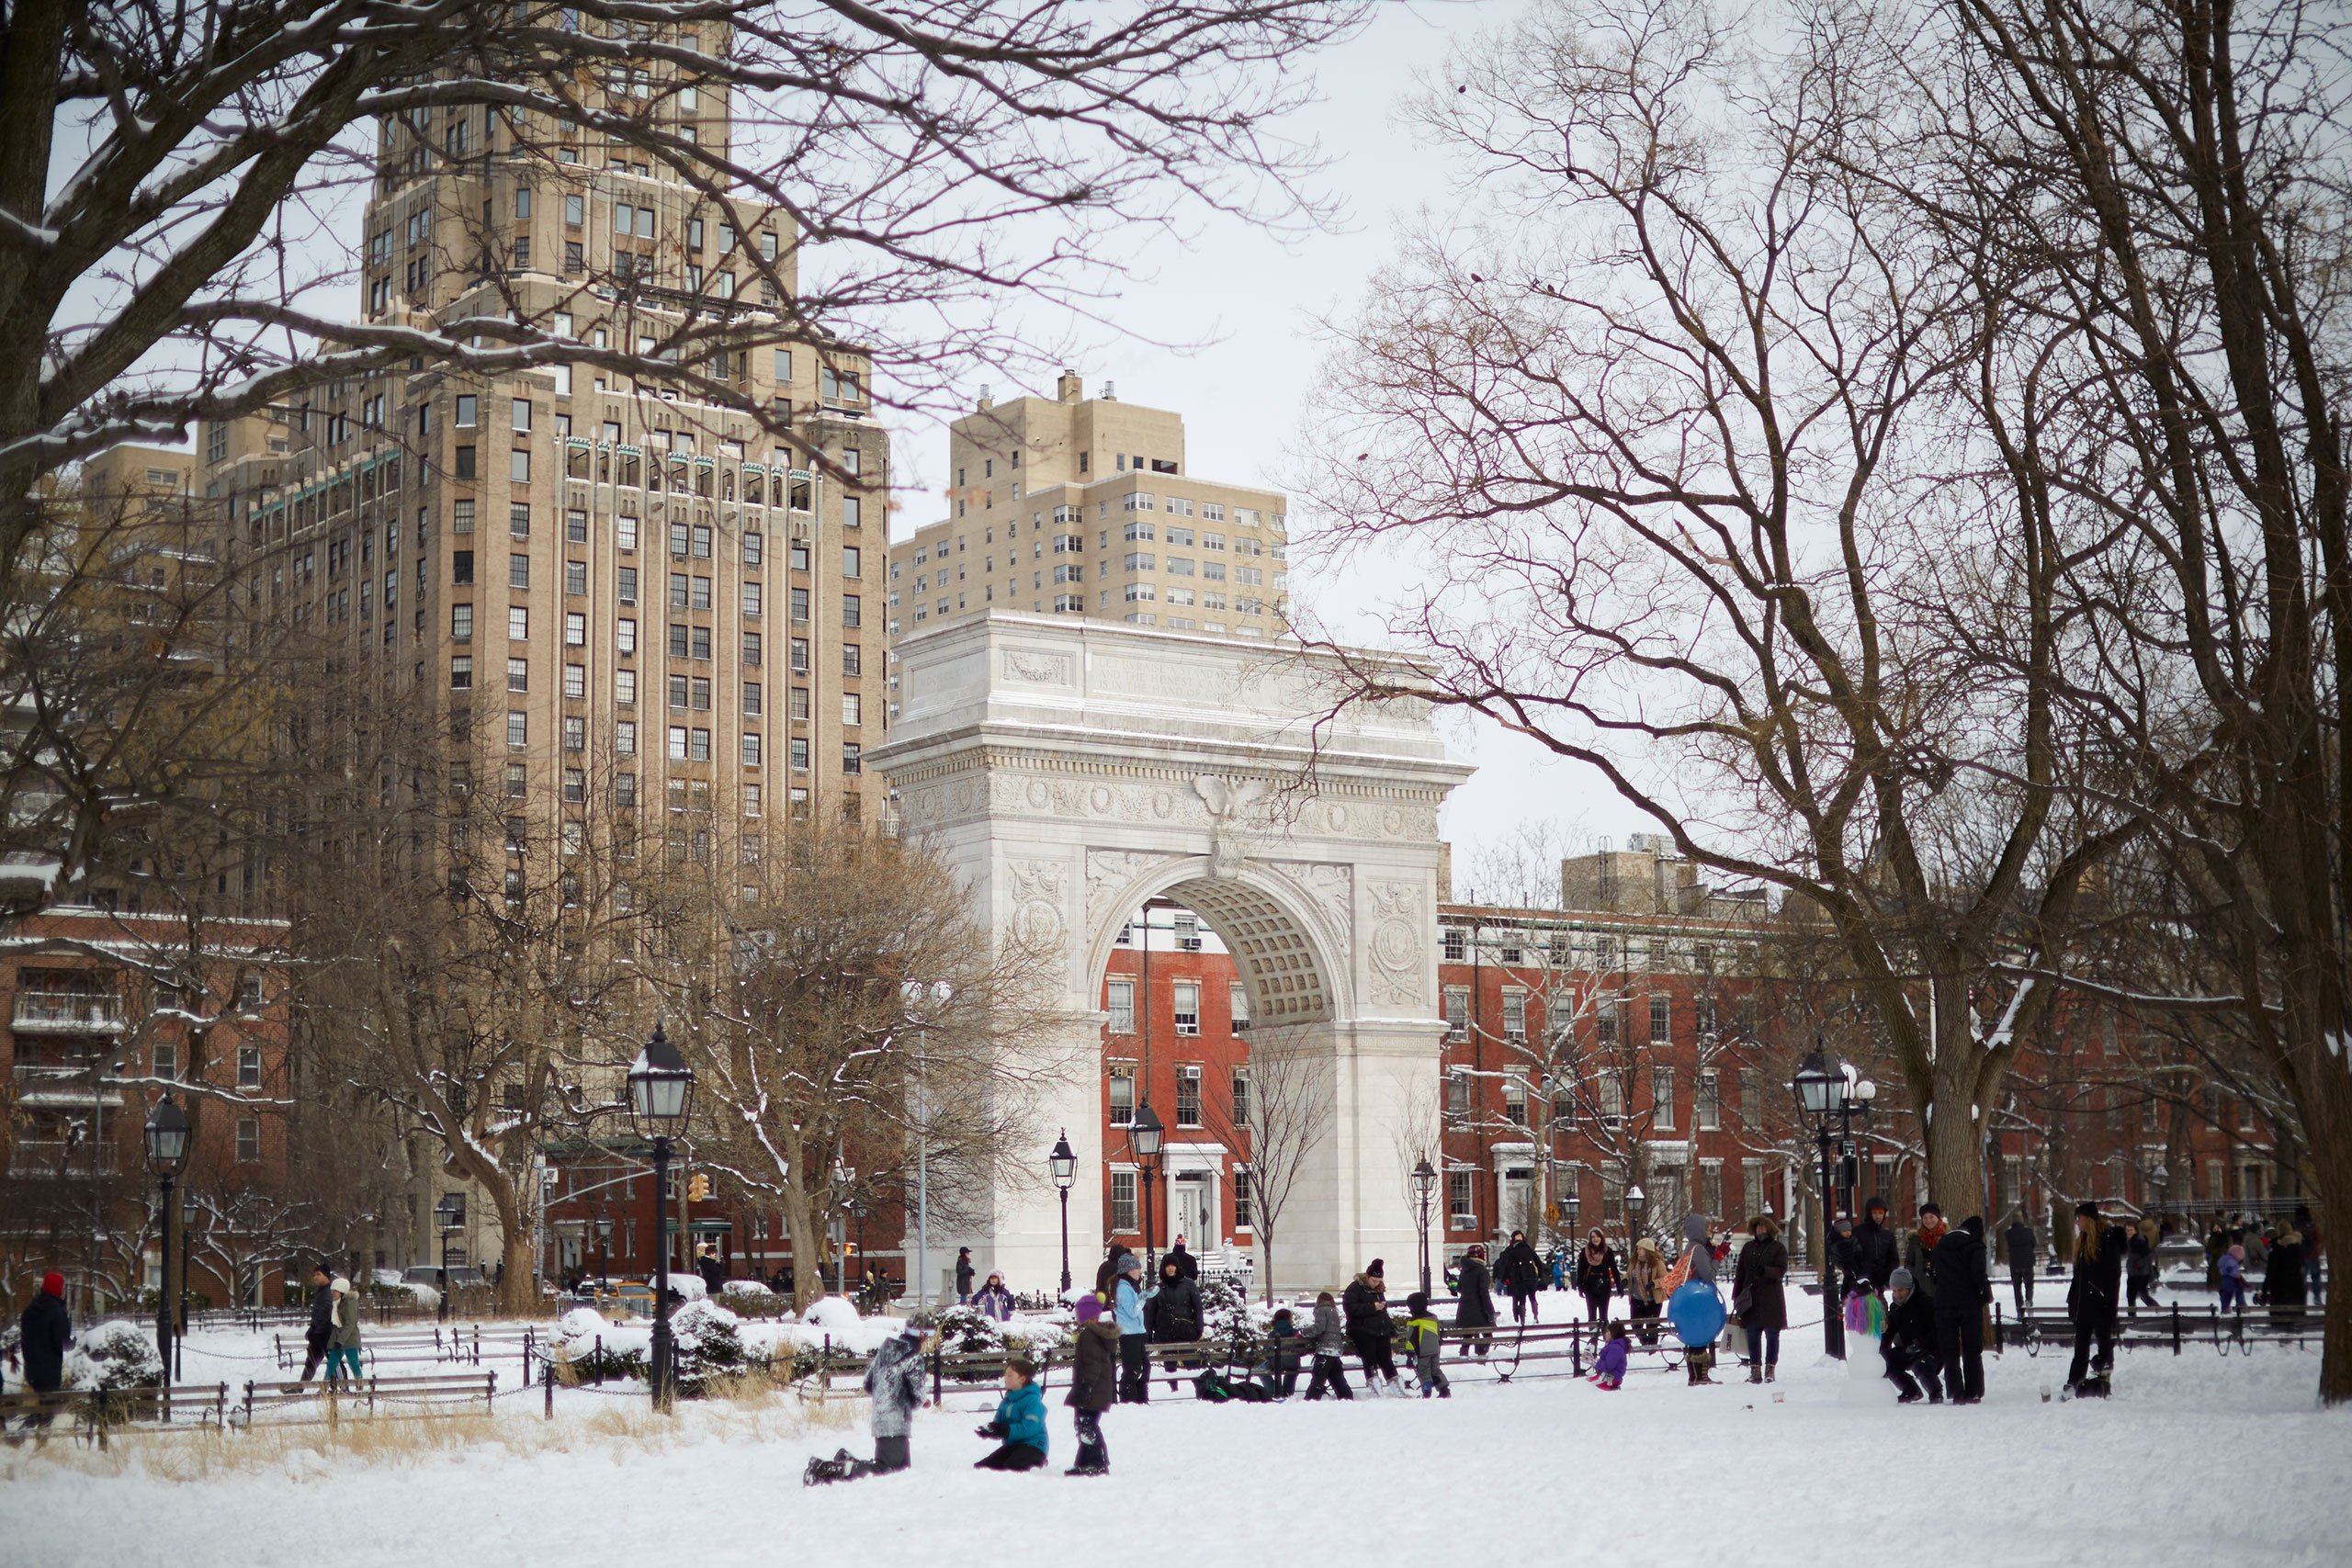 Groups of people playing in the snow in front of the arch at Washington Square Park.